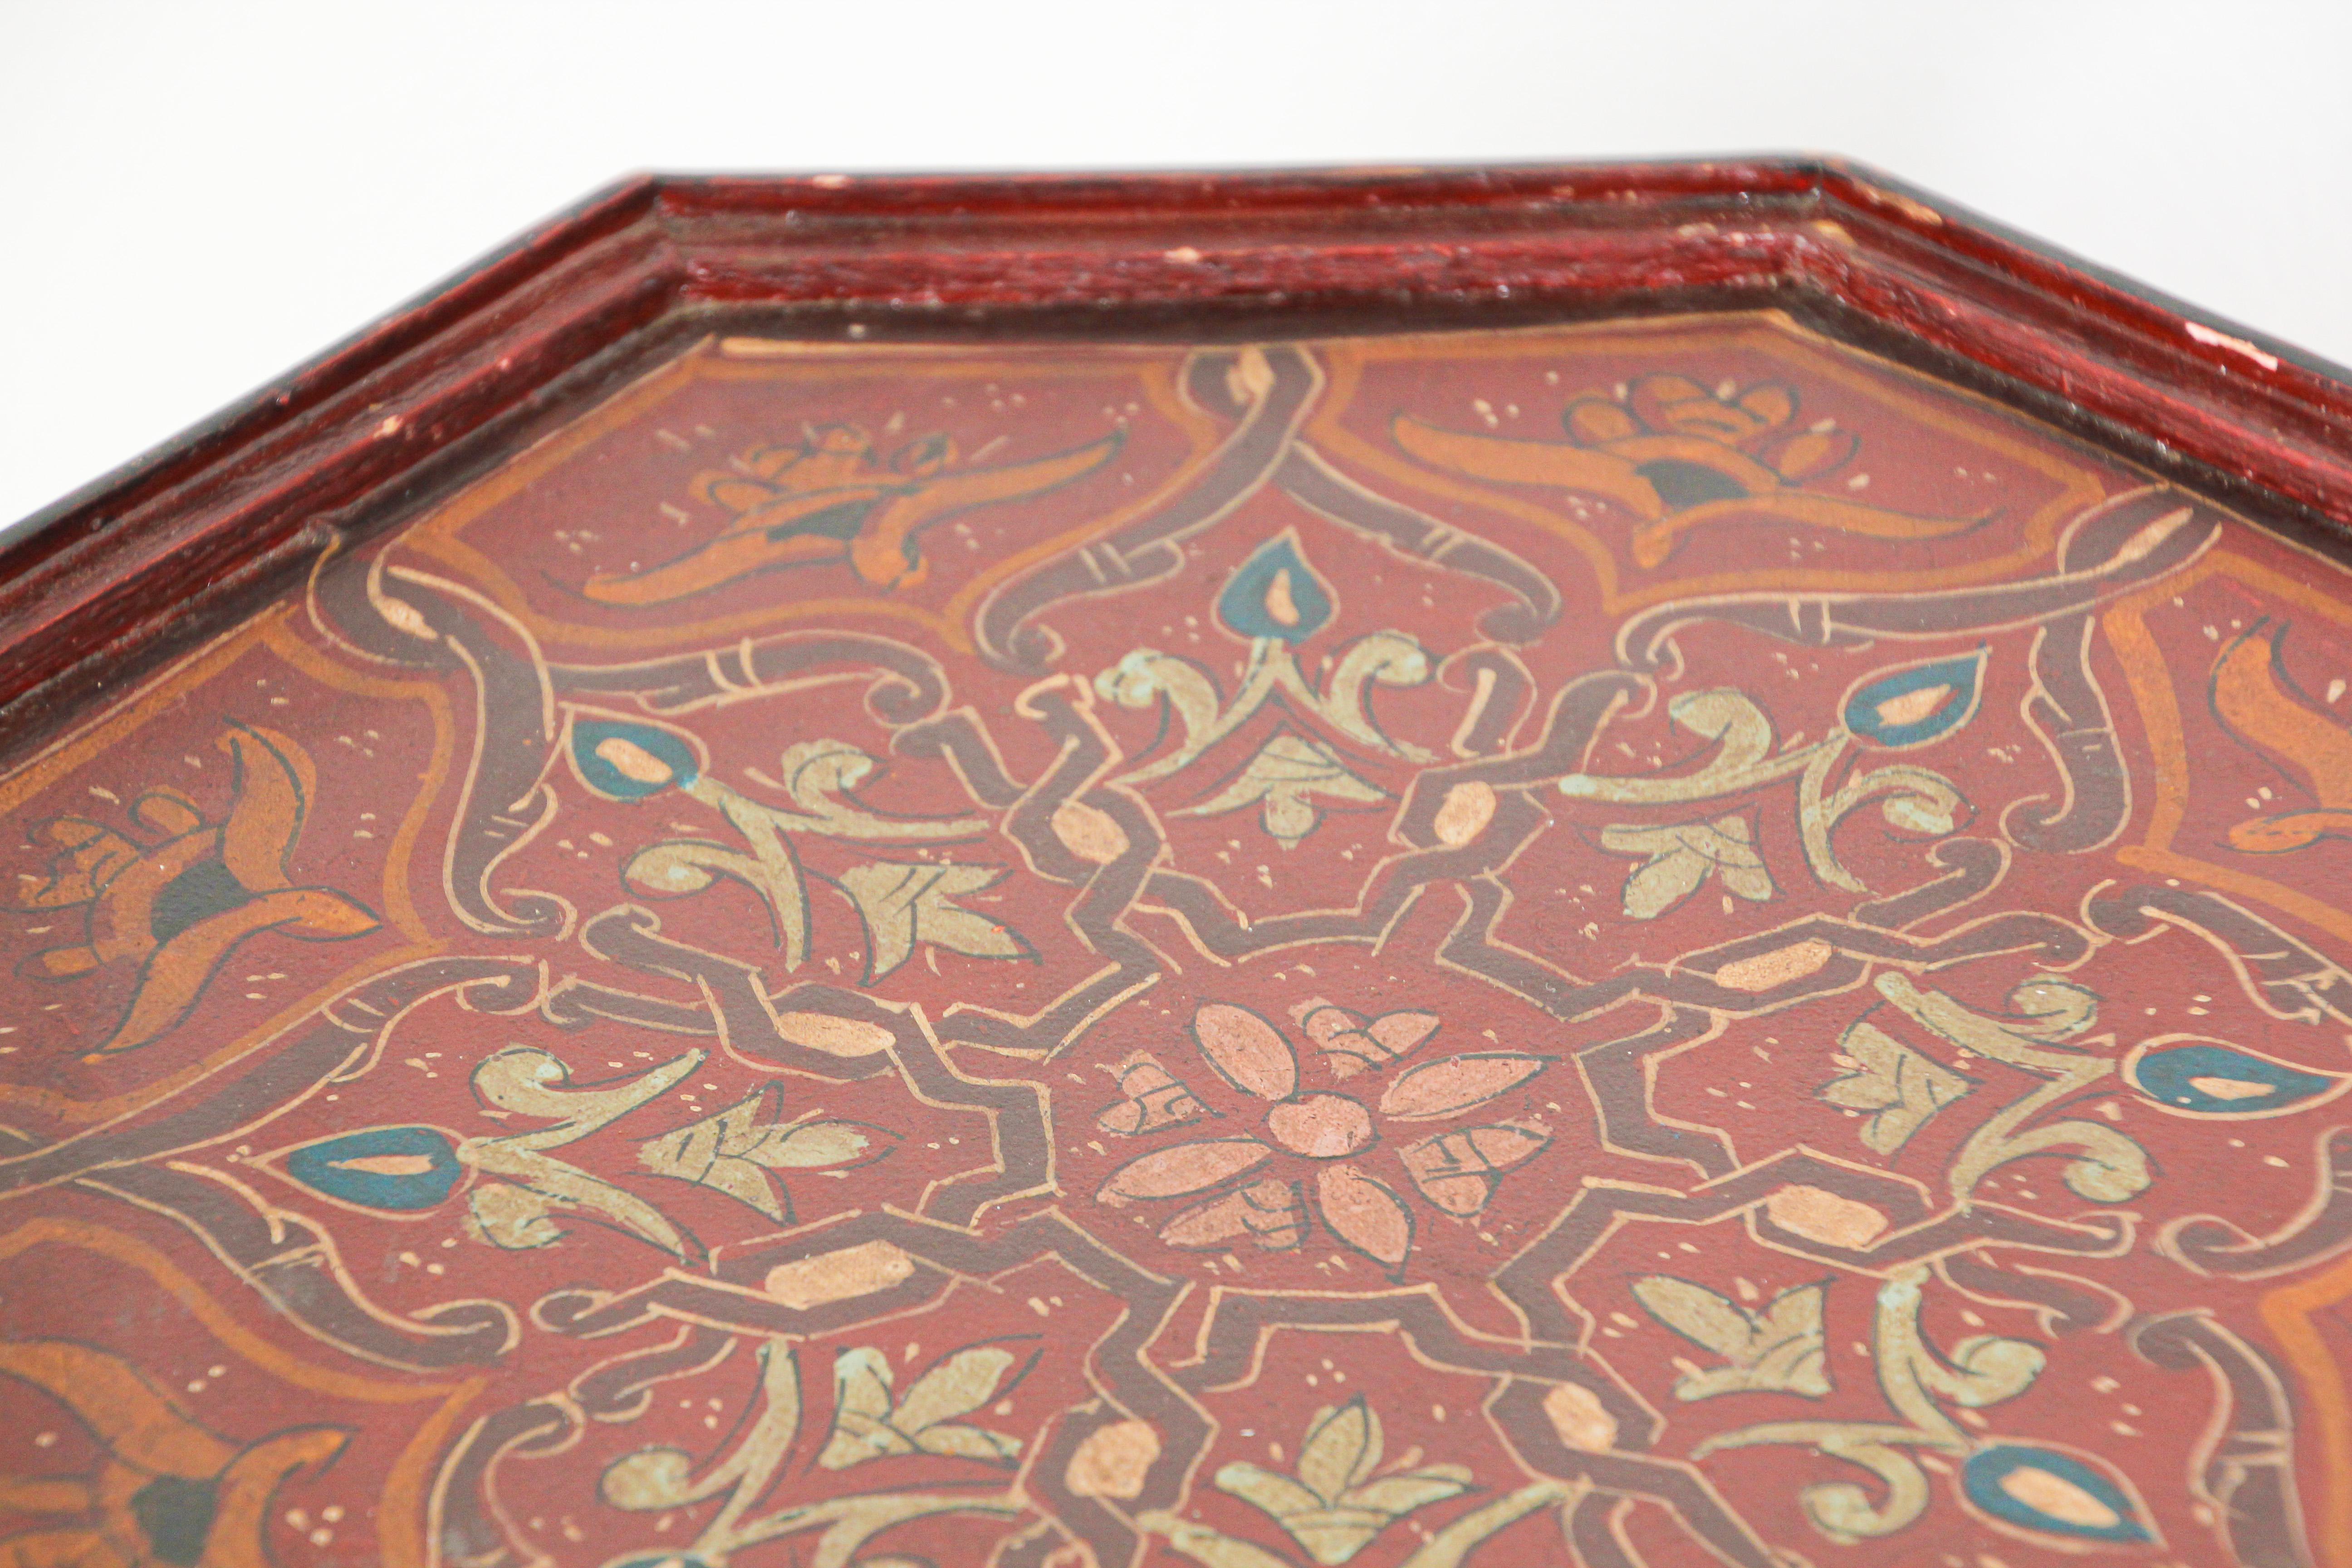 Wood Moroccan Pedestal Table, Moorish Hand Painted Design Octagonal Shape Table 1960s For Sale